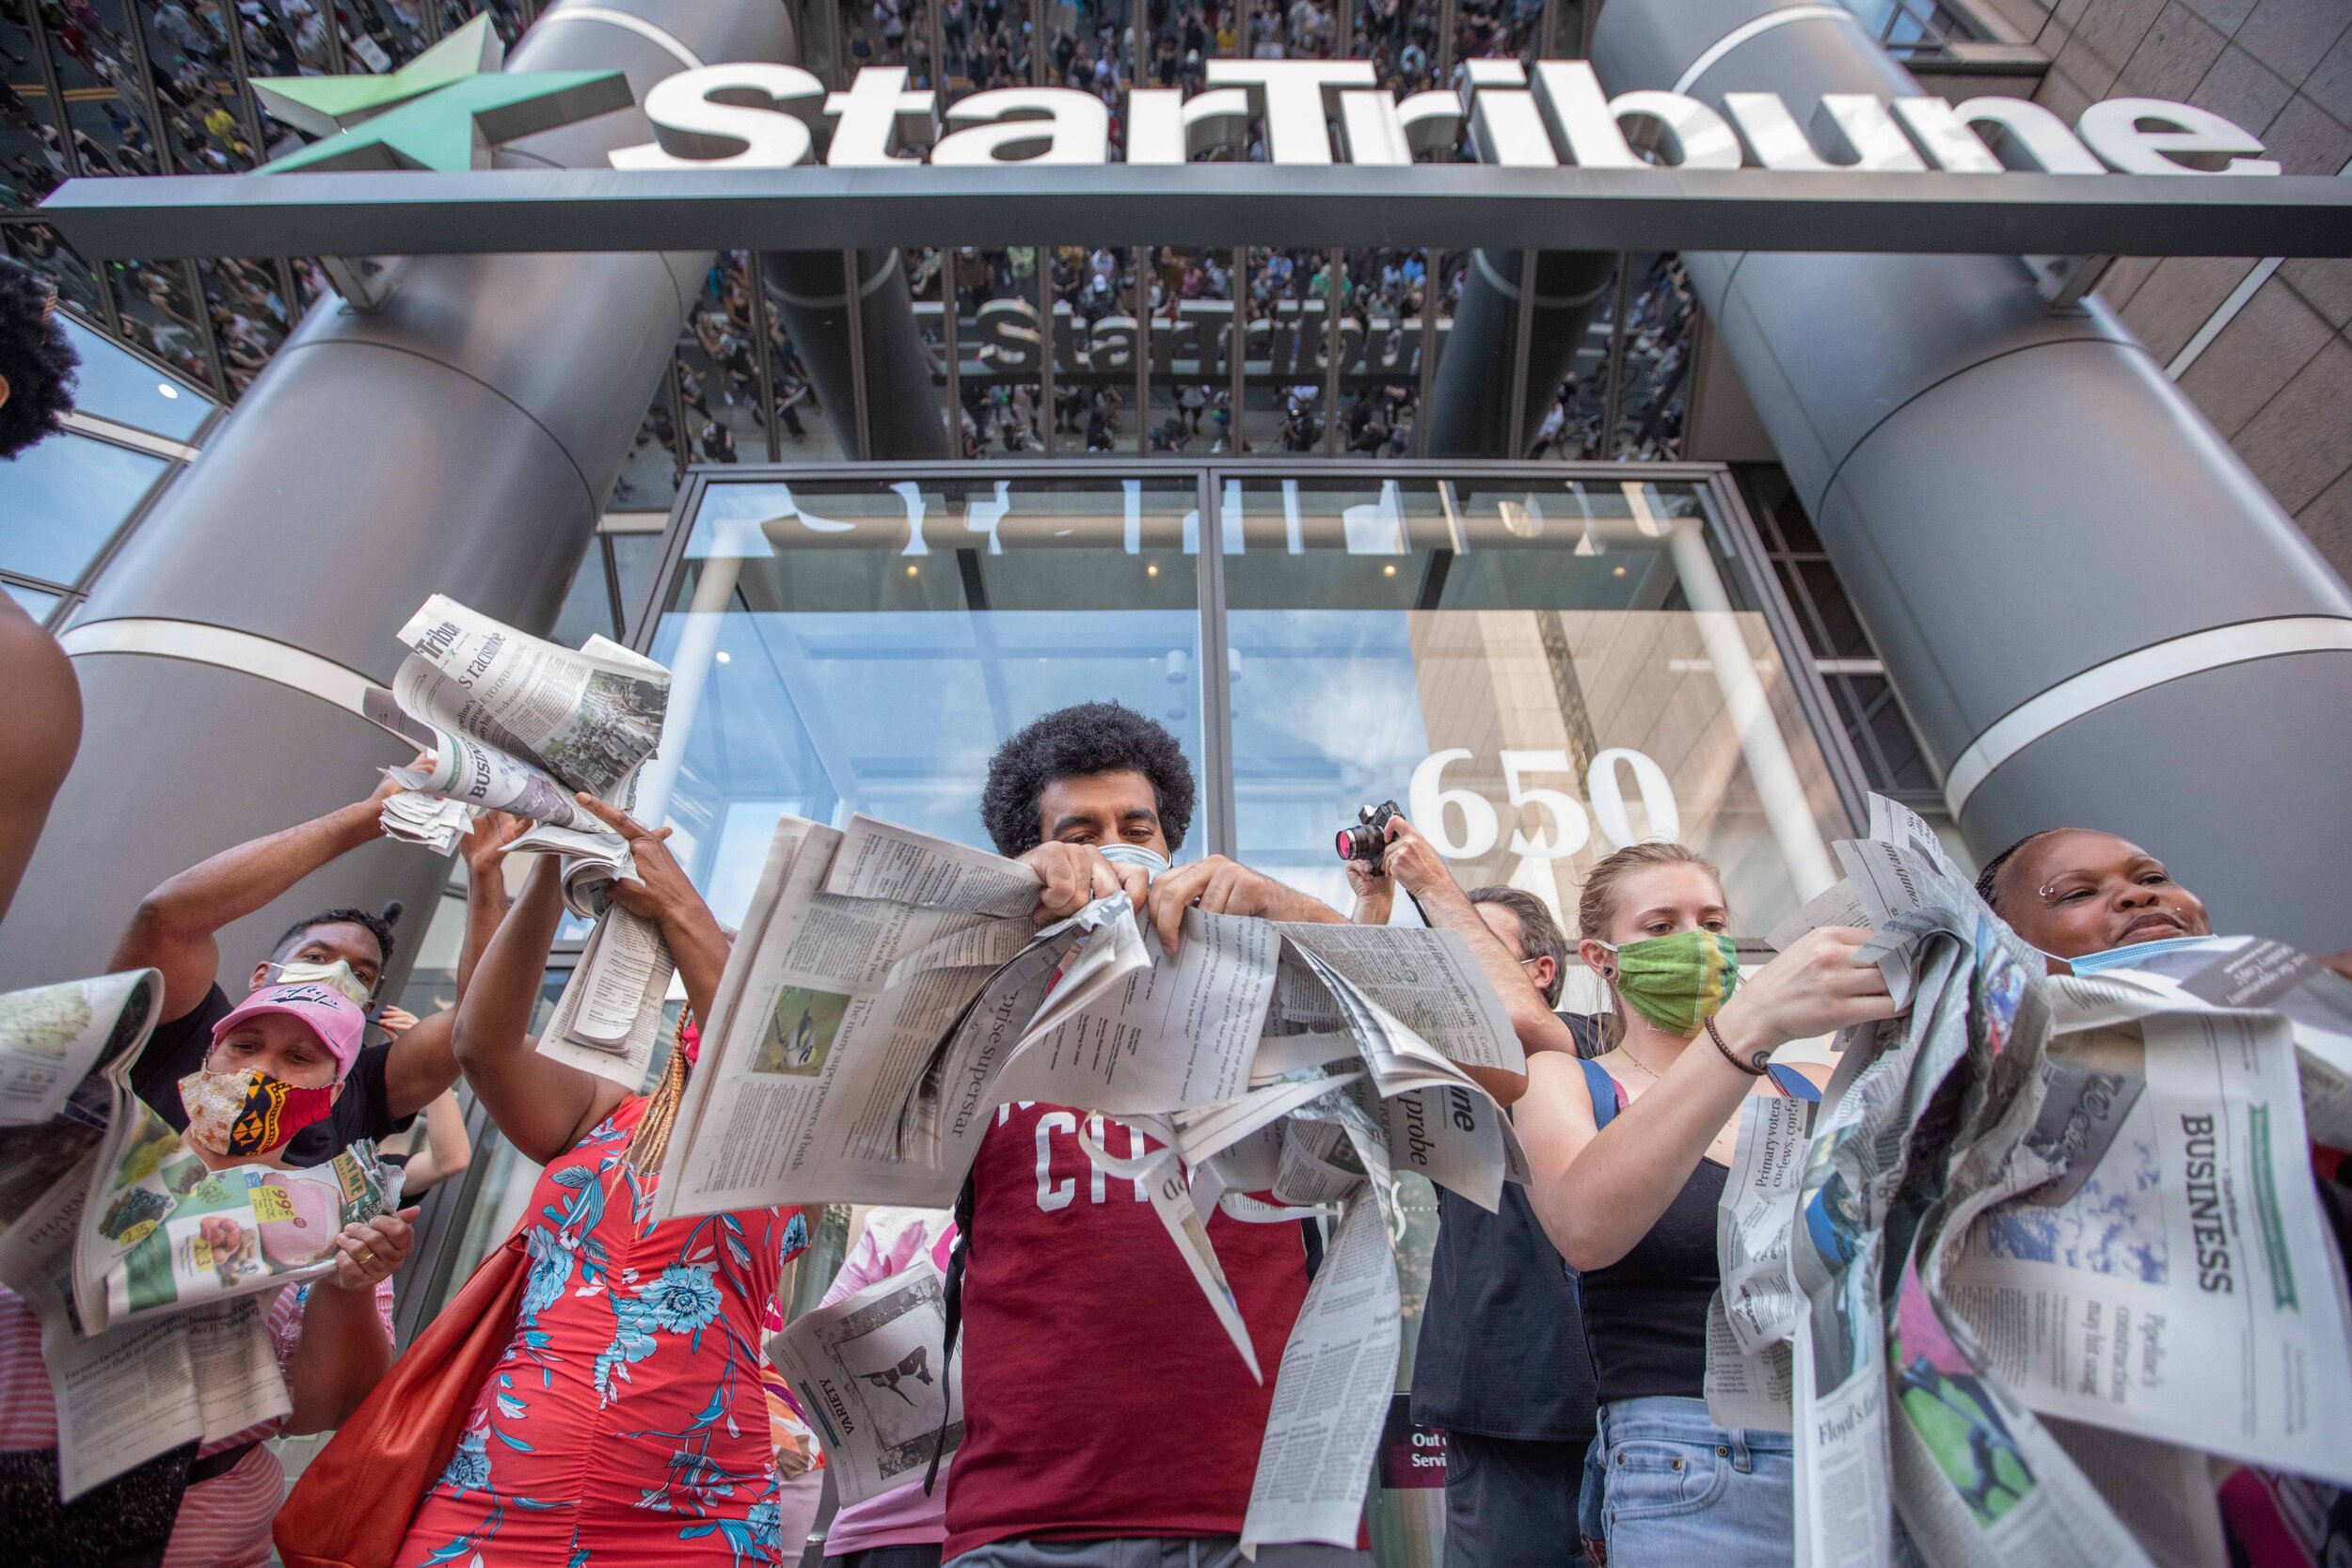  Protesters tear up copies of Star Tribune newspapers in front of the Star Tribune building in Minneapolis, Minnesota as they protest the way the paper has covered issues in the past on Jun 3, 2020. 